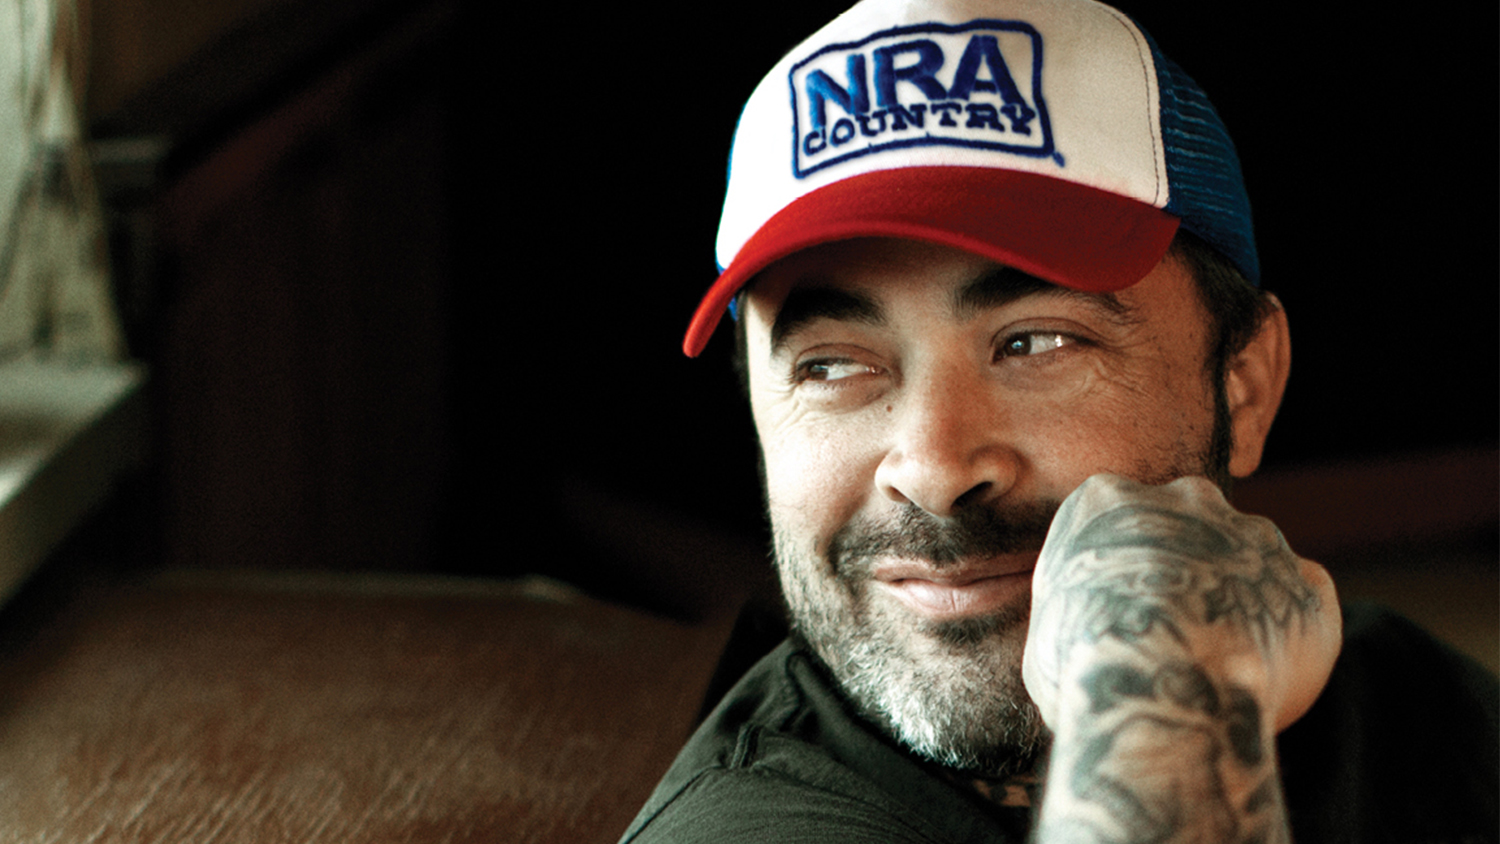 Aaron Lewis: Musician, Father, and Patriot